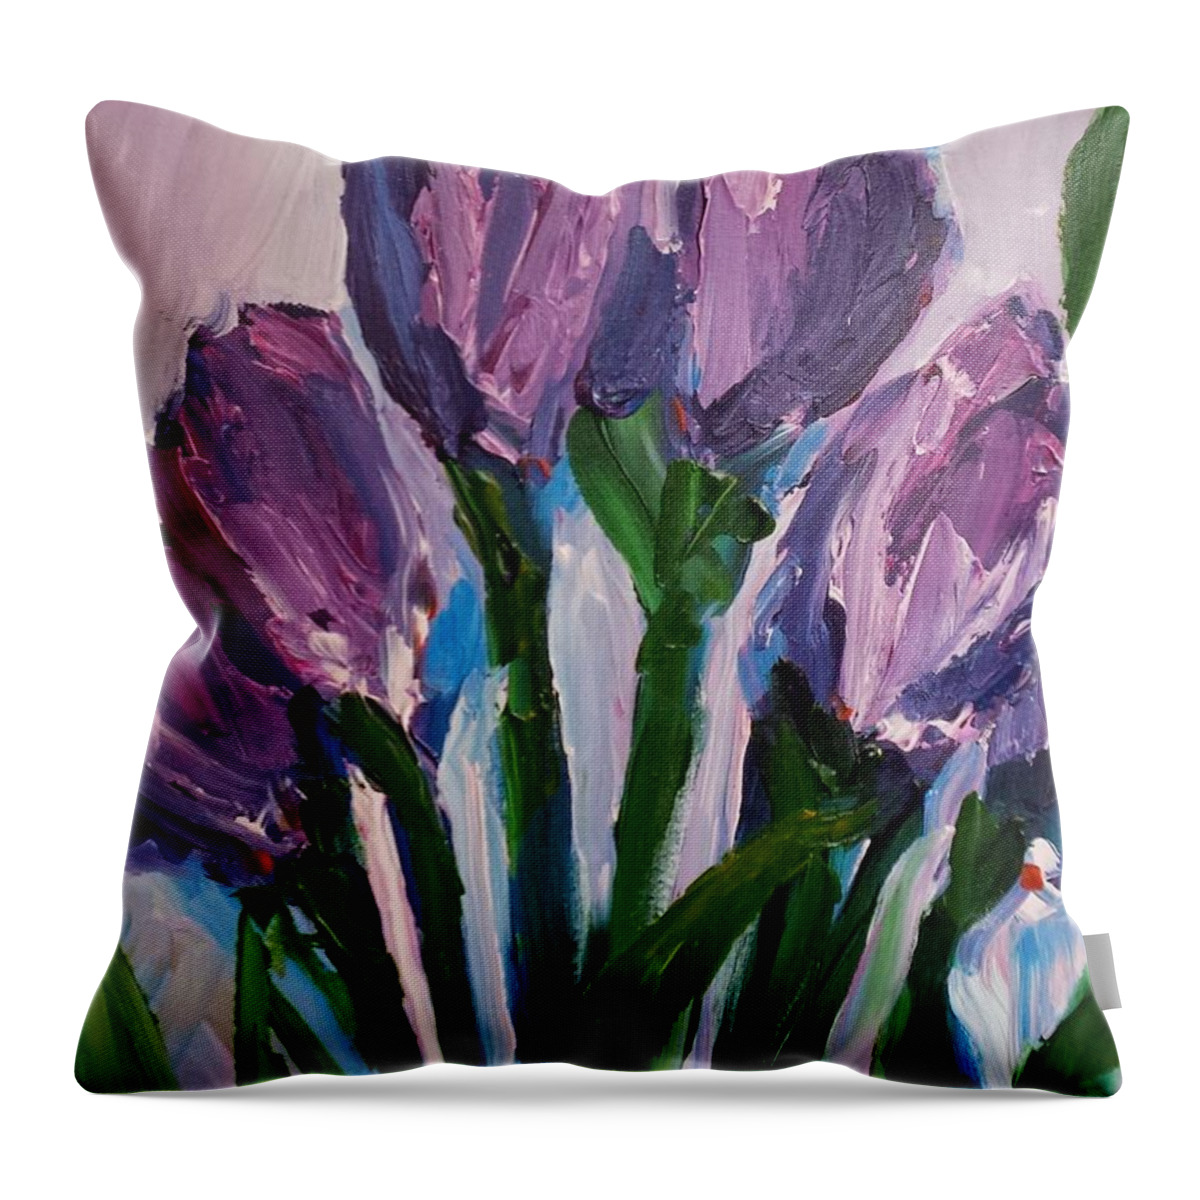 Spring Throw Pillow featuring the painting Purple Passion by Sherry Harradence